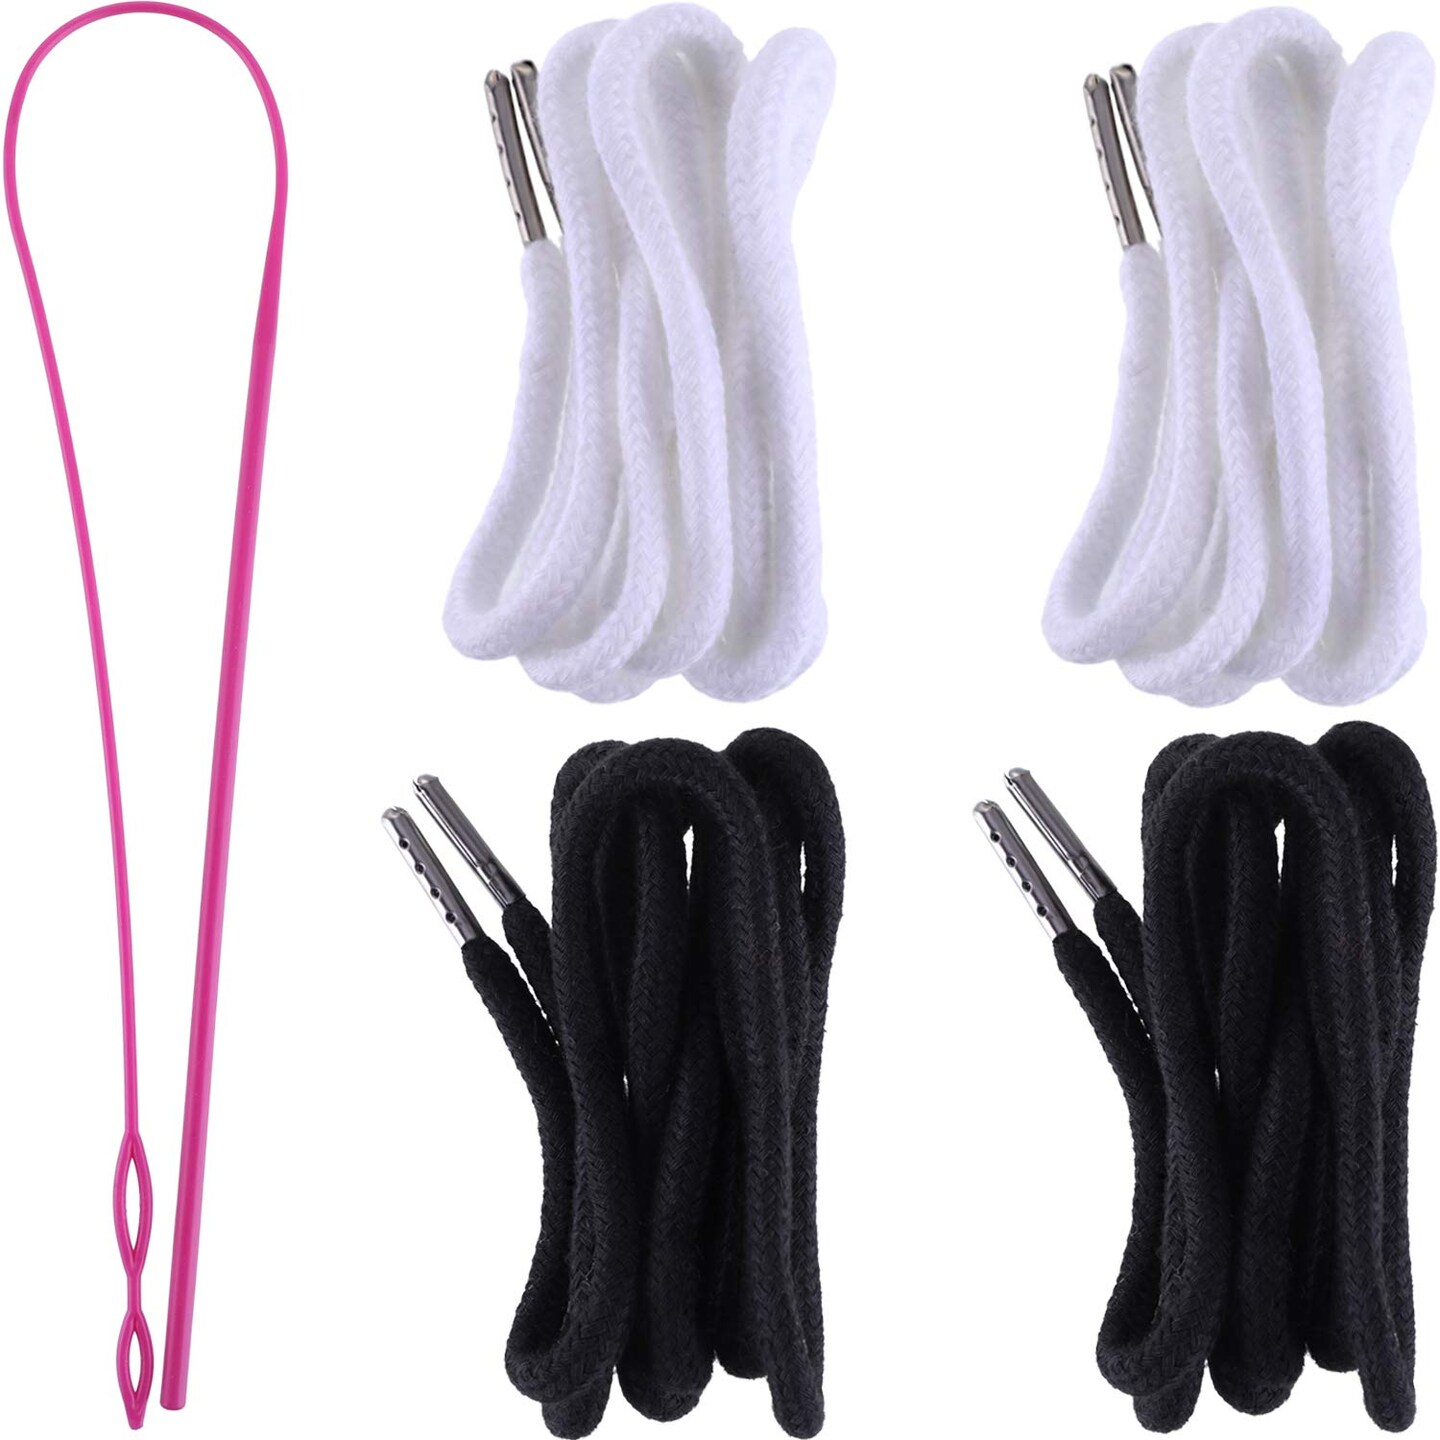 Drawstring Cords Replacement Drawstrings with Easy Threader for Sweatpants Shorts Pants Jackets Coats (Black, White)